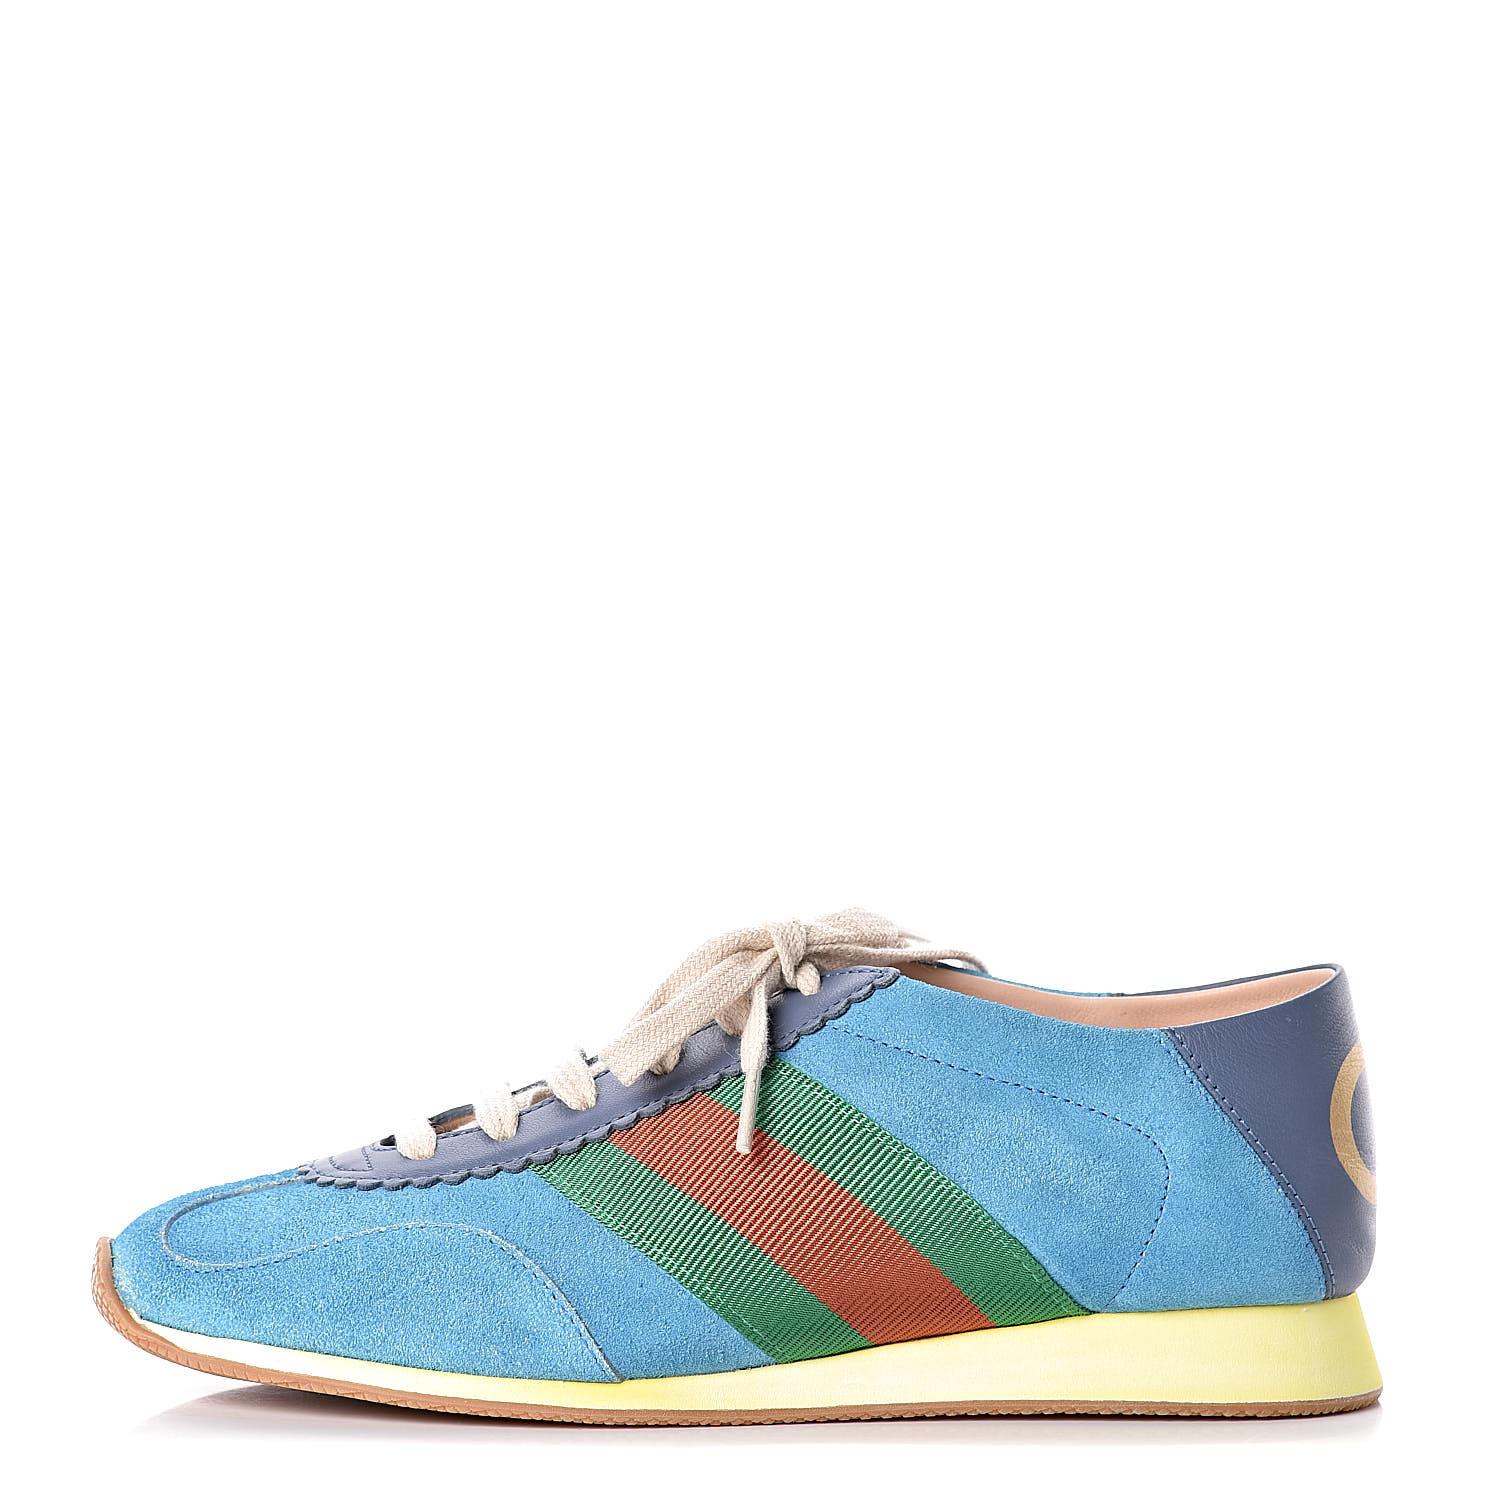 GUCCI Suede Web Womens Rocket Sneakers 37.5 Blue 447706 | FASHIONPHILE